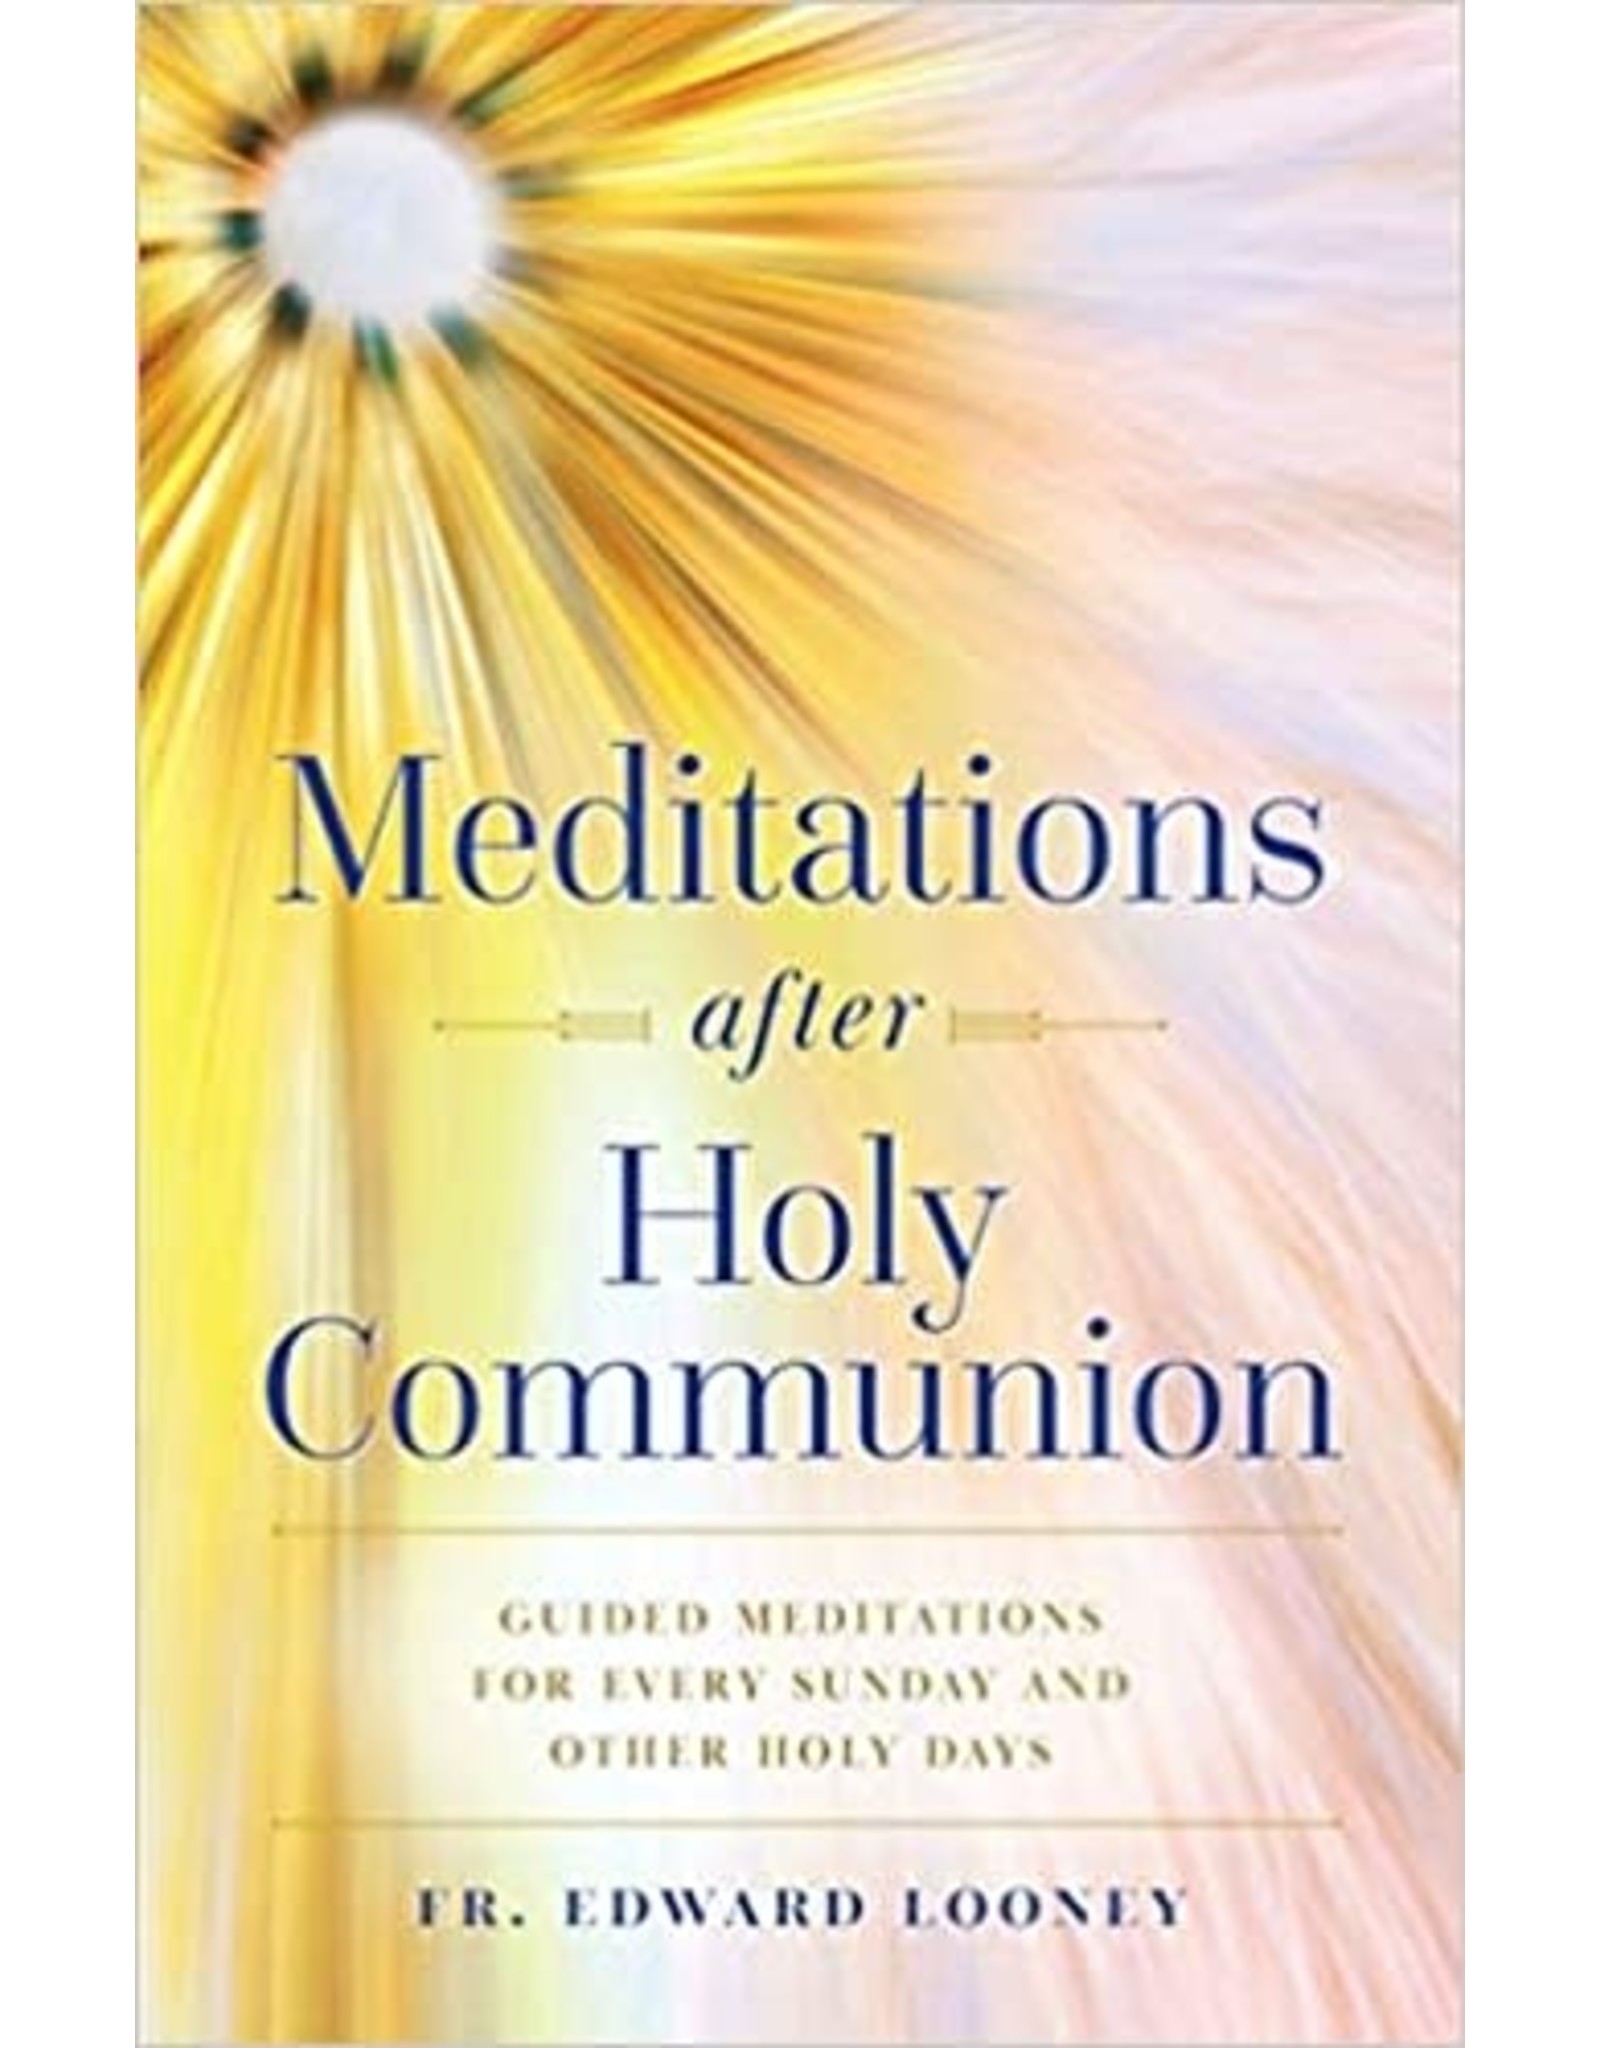 Sophia Press Meditations after Holy Communion: Guided Meditations for Every Sunday and Other Holy Days by Fr. Edward Looney (Paperback)